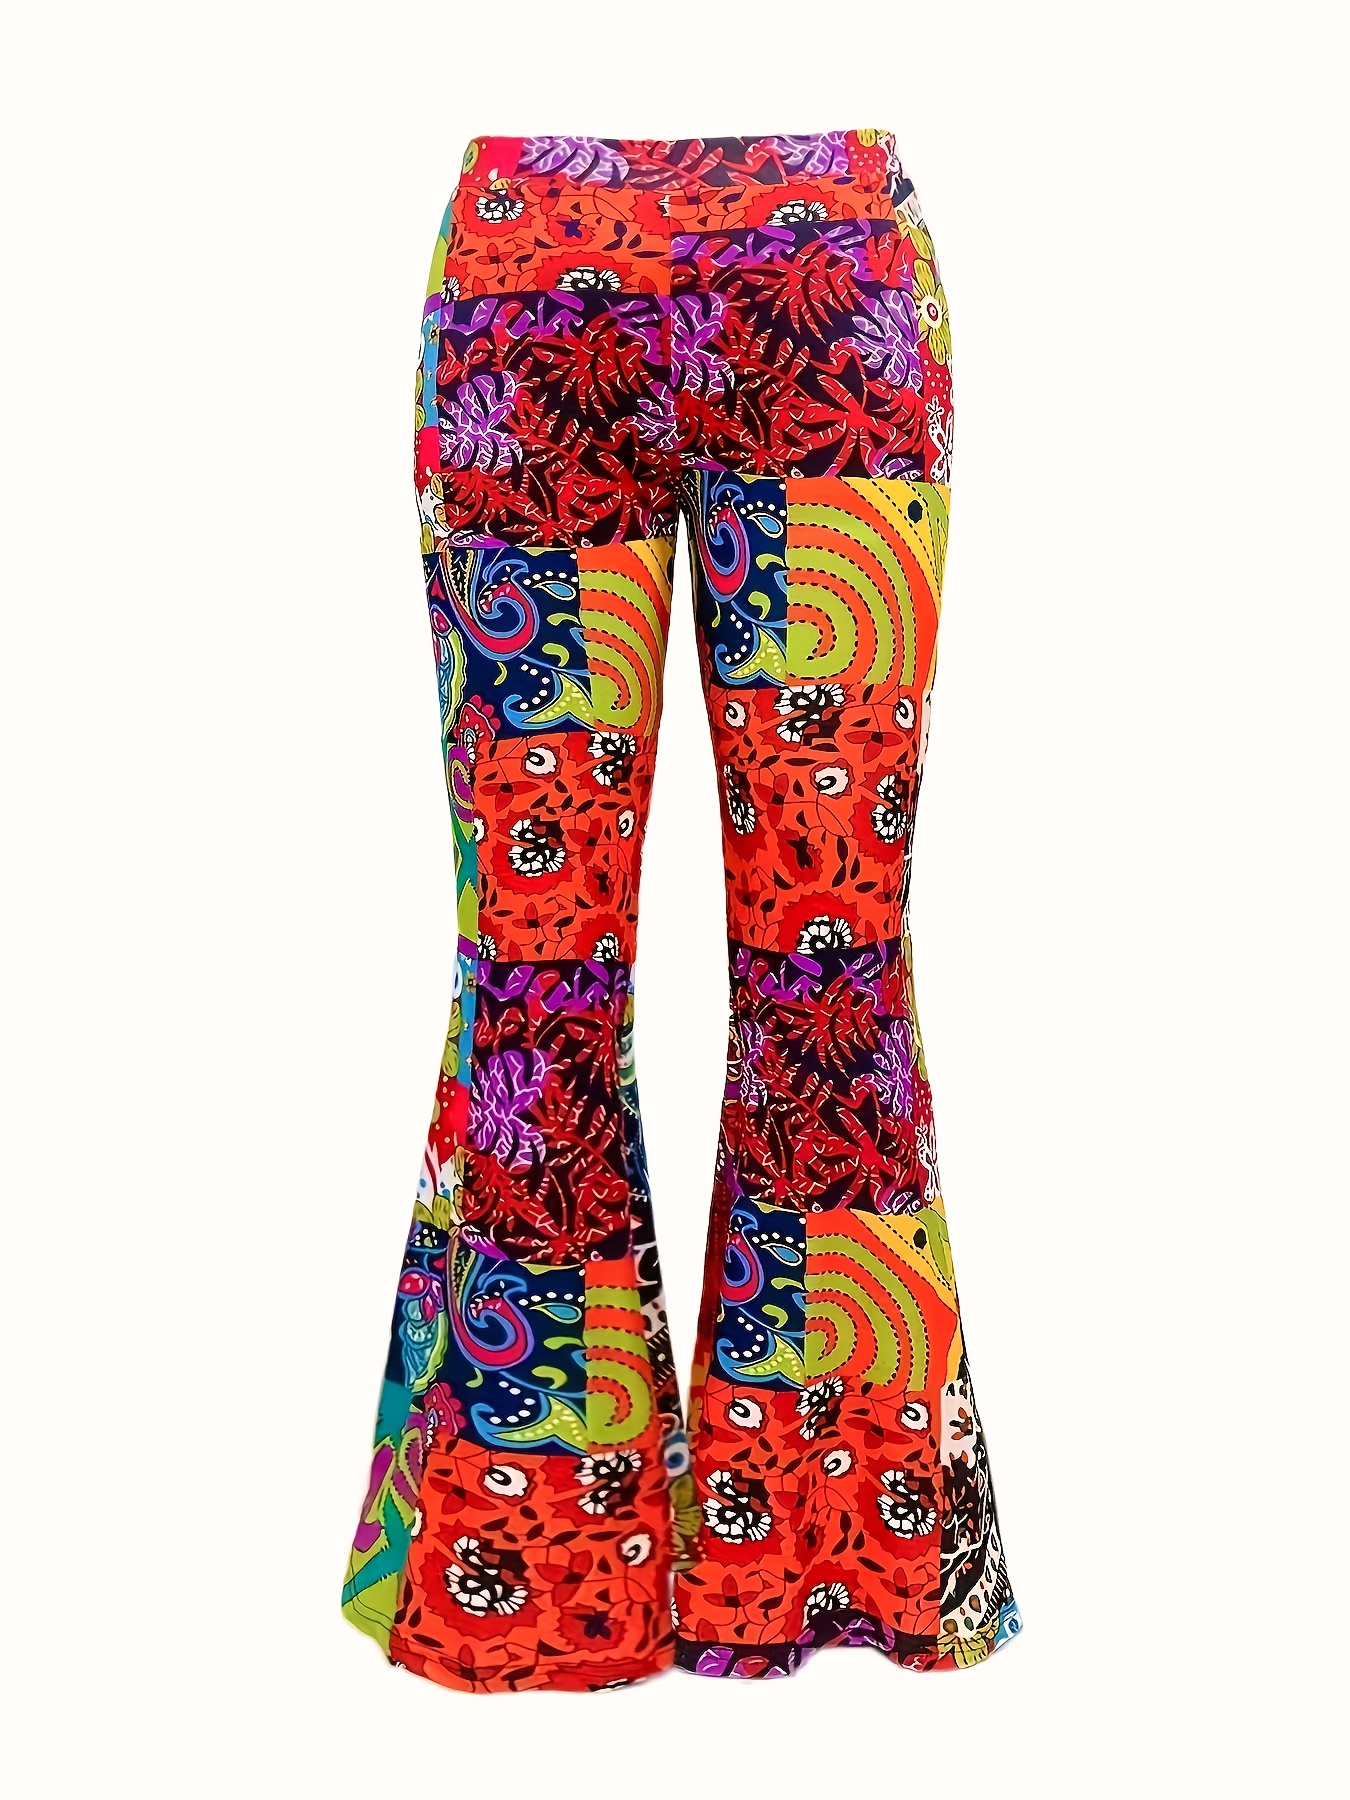 Pink Flower Bell Bottom Hippie Pants 60s/70s - The Costume Shoppe